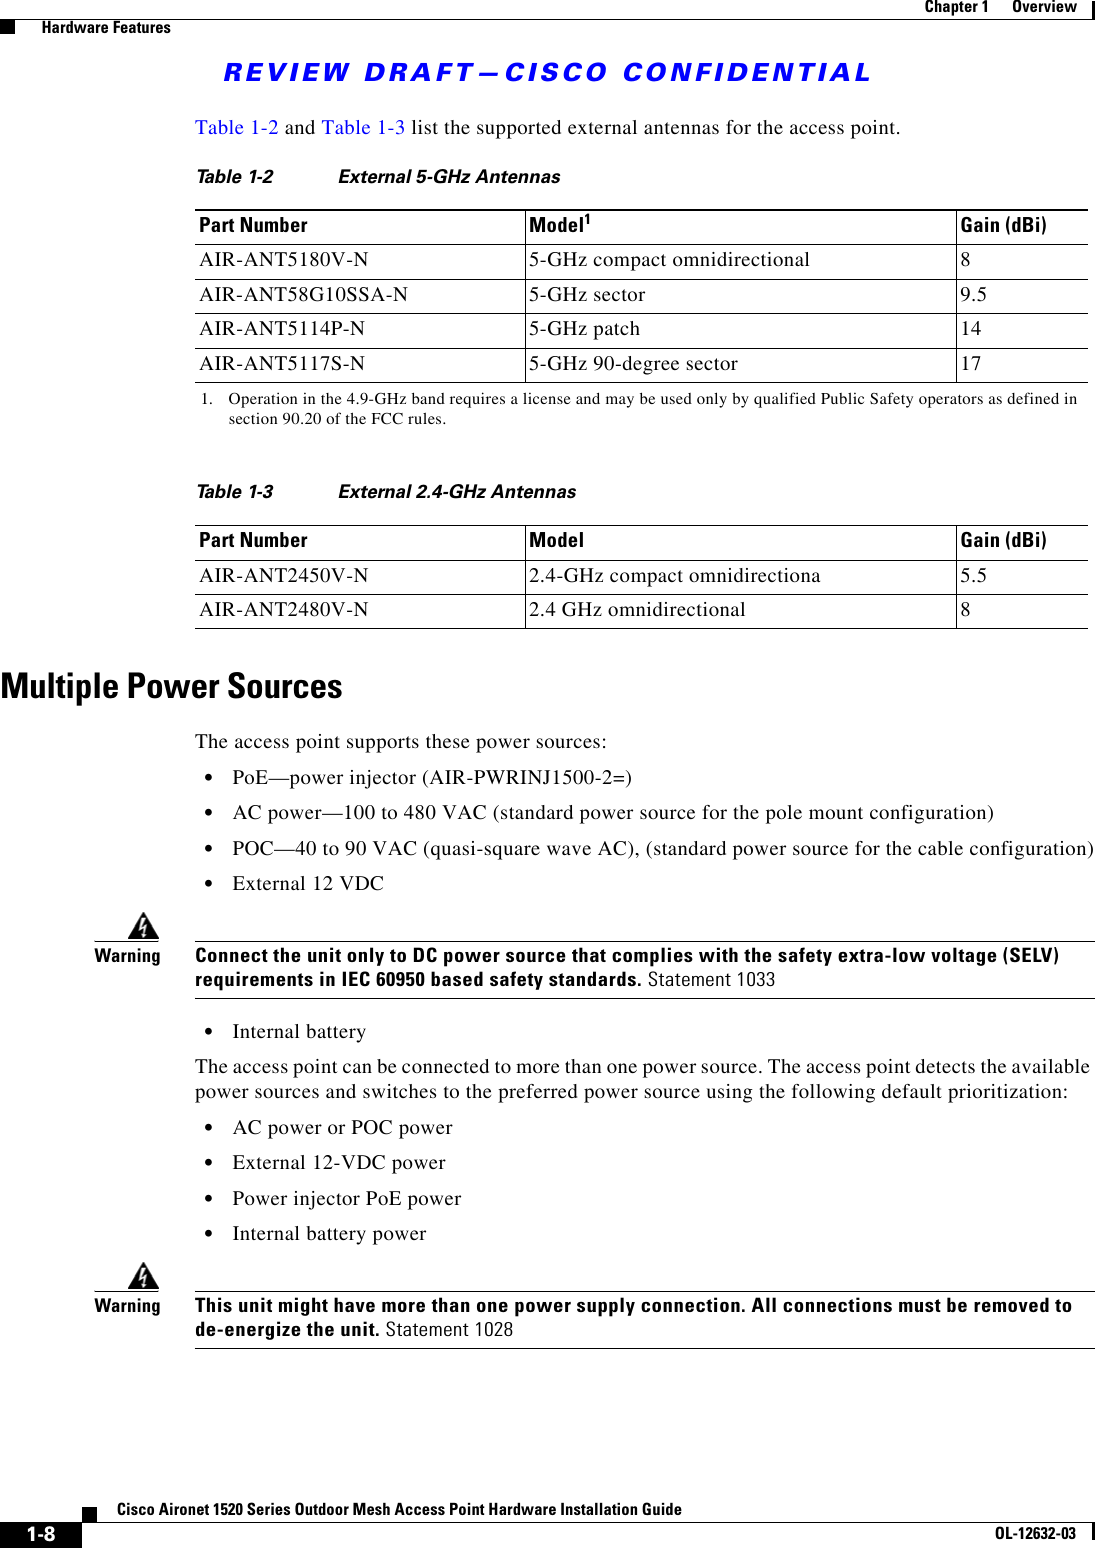 REVIEW DRAFT—CISCO CONFIDENTIAL1-8Cisco Aironet 1520 Series Outdoor Mesh Access Point Hardware Installation GuideOL-12632-03Chapter 1      Overview  Hardware FeaturesTable 1-2 and Table 1-3 list the supported external antennas for the access point.Multiple Power SourcesThe access point supports these power sources:  • PoE—power injector (AIR-PWRINJ1500-2=)  • AC power—100 to 480 VAC (standard power source for the pole mount configuration)  • POC—40 to 90 VAC (quasi-square wave AC), (standard power source for the cable configuration)  • External 12 VDC WarningConnect the unit only to DC power source that complies with the safety extra-low voltage (SELV) requirements in IEC 60950 based safety standards. Statement 1033  • Internal batteryThe access point can be connected to more than one power source. The access point detects the available power sources and switches to the preferred power source using the following default prioritization:  • AC power or POC power  • External 12-VDC power  • Power injector PoE power   • Internal battery powerWarningThis unit might have more than one power supply connection. All connections must be removed to de-energize the unit. Statement 1028Ta b l e  1-2 External 5-GHz Antennas Part Number Model11. Operation in the 4.9-GHz band requires a license and may be used only by qualified Public Safety operators as defined in section 90.20 of the FCC rules.Gain (dBi)AIR-ANT5180V-N 5-GHz compact omnidirectional 8AIR-ANT58G10SSA-N  5-GHz sector 9.5 AIR-ANT5114P-N 5-GHz patch 14 AIR-ANT5117S-N 5-GHz 90-degree sector 17Ta b l e  1-3 External 2.4-GHz AntennasPart Number Model Gain (dBi)AIR-ANT2450V-N 2.4-GHz compact omnidirectiona 5.5AIR-ANT2480V-N 2.4 GHz omnidirectional 8 